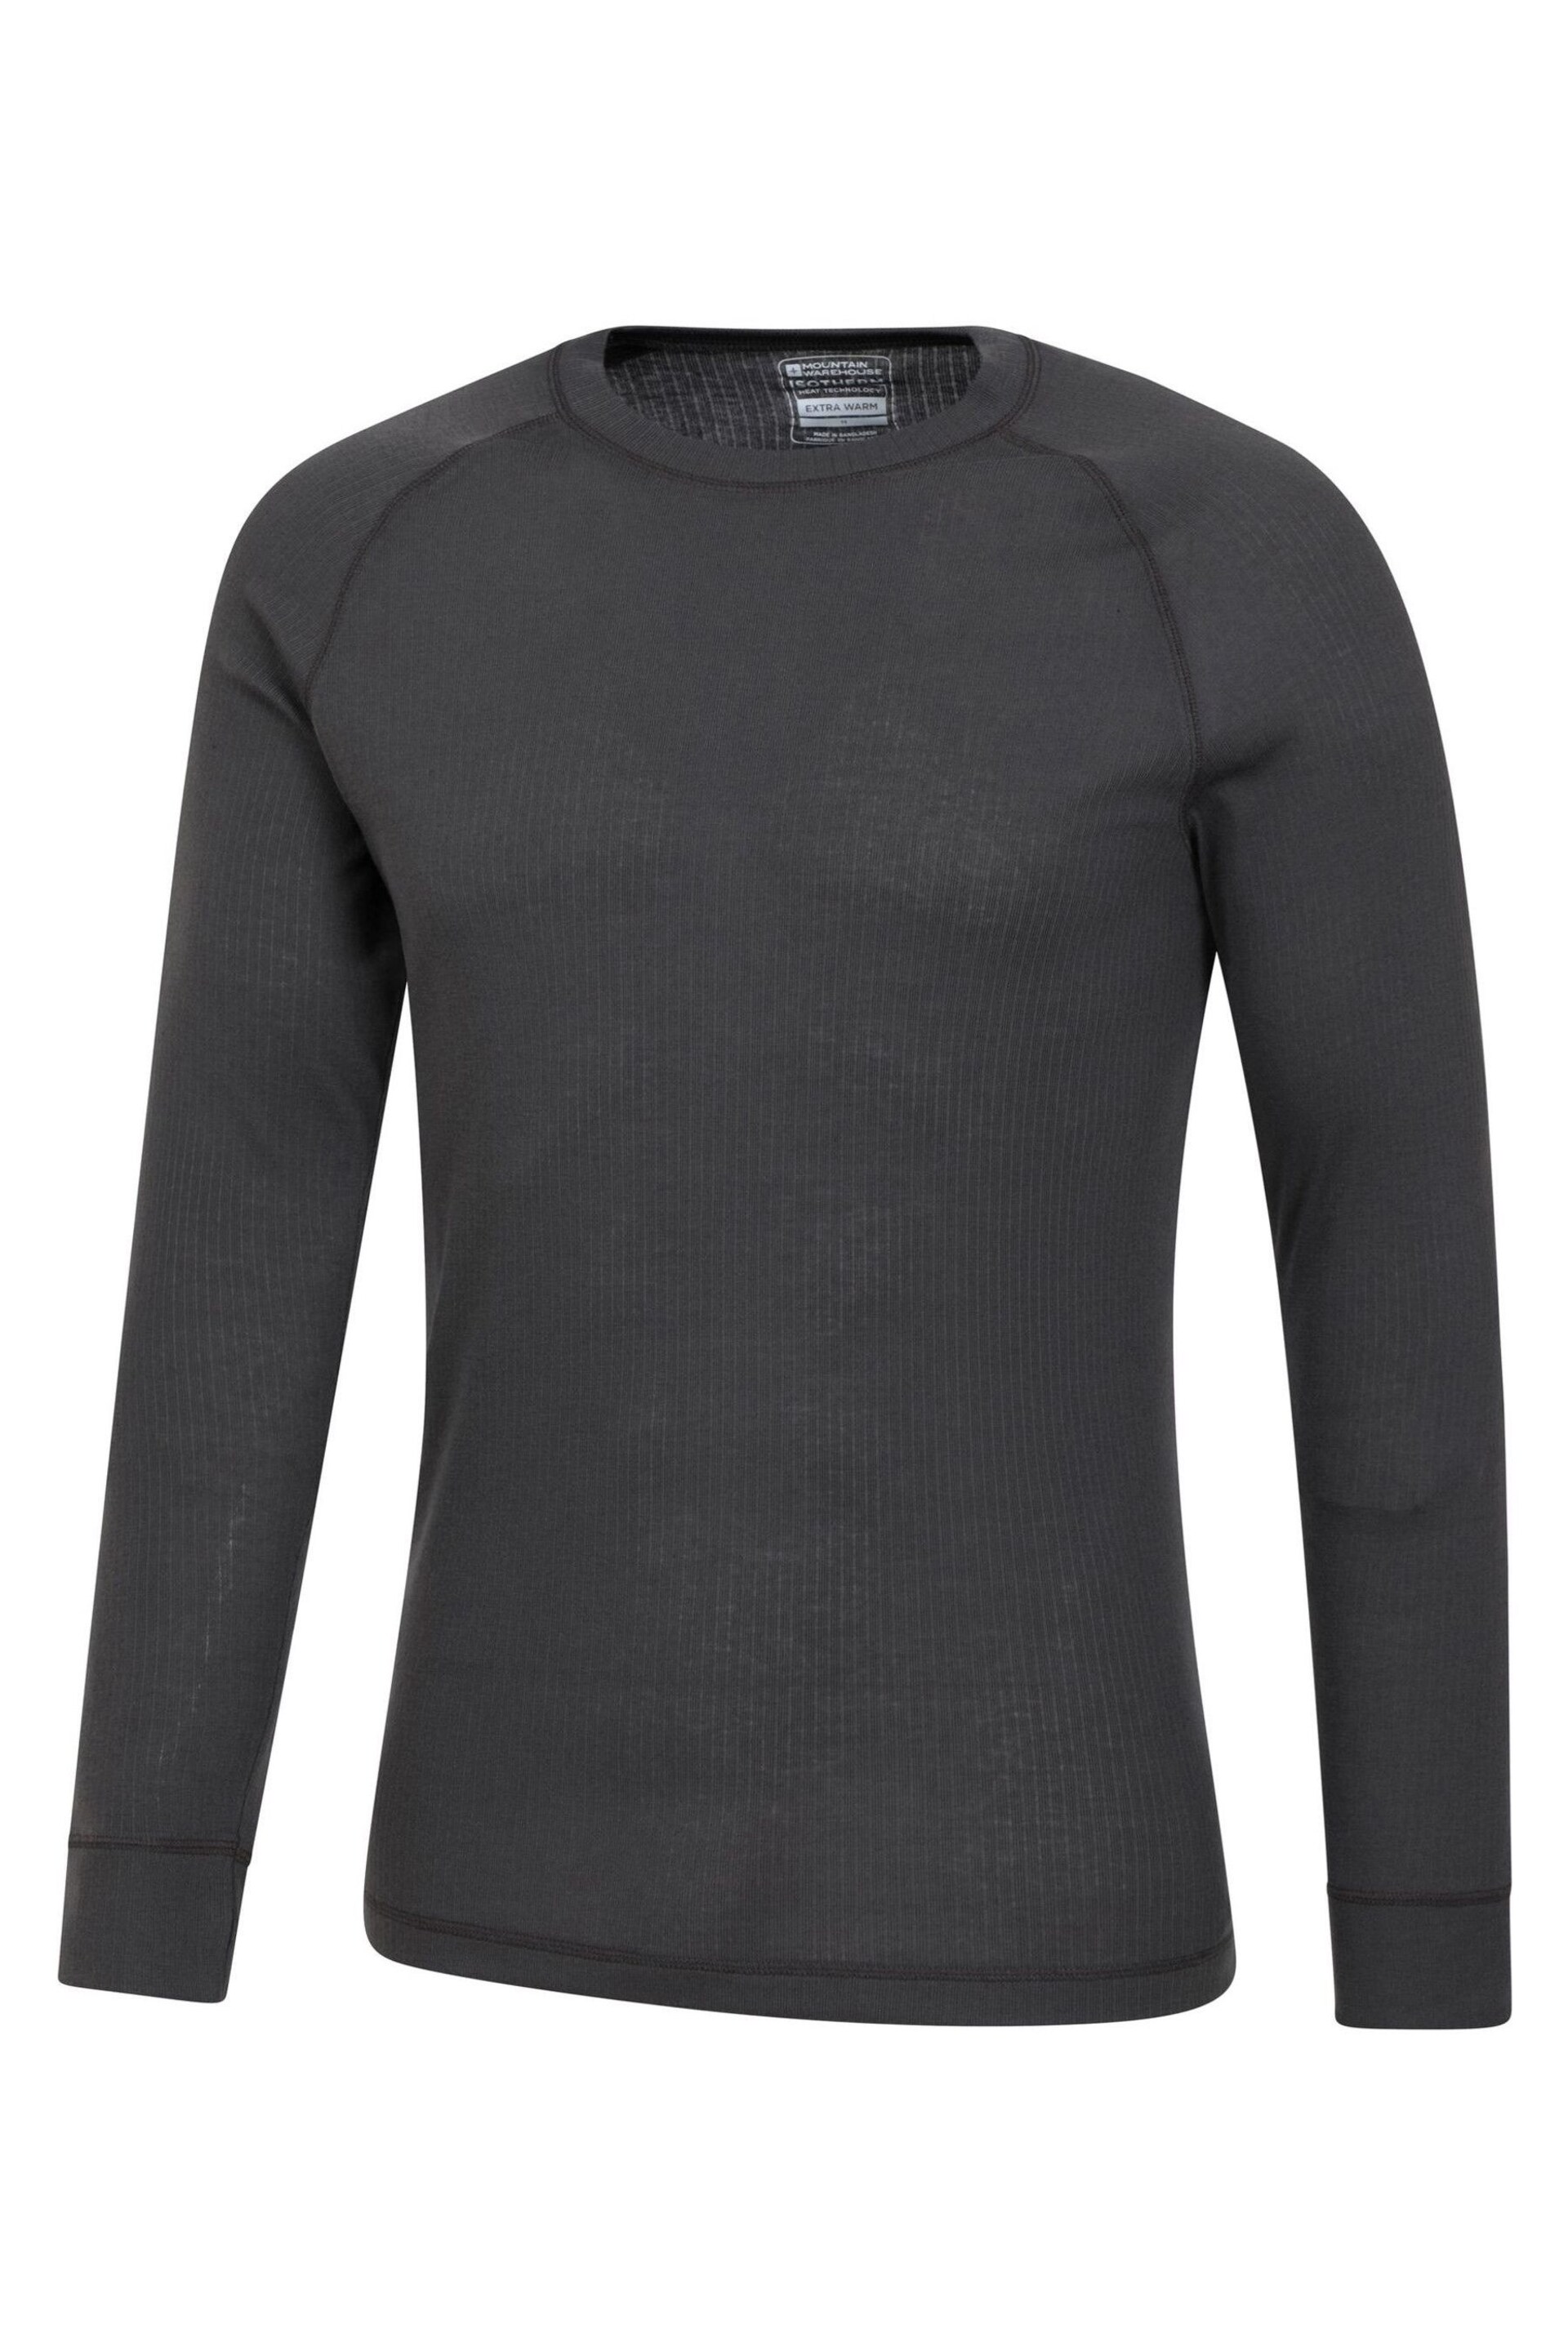 Mountain Warehouse Grey Talus Mens Thermal Top Multipack - Image 4 of 4